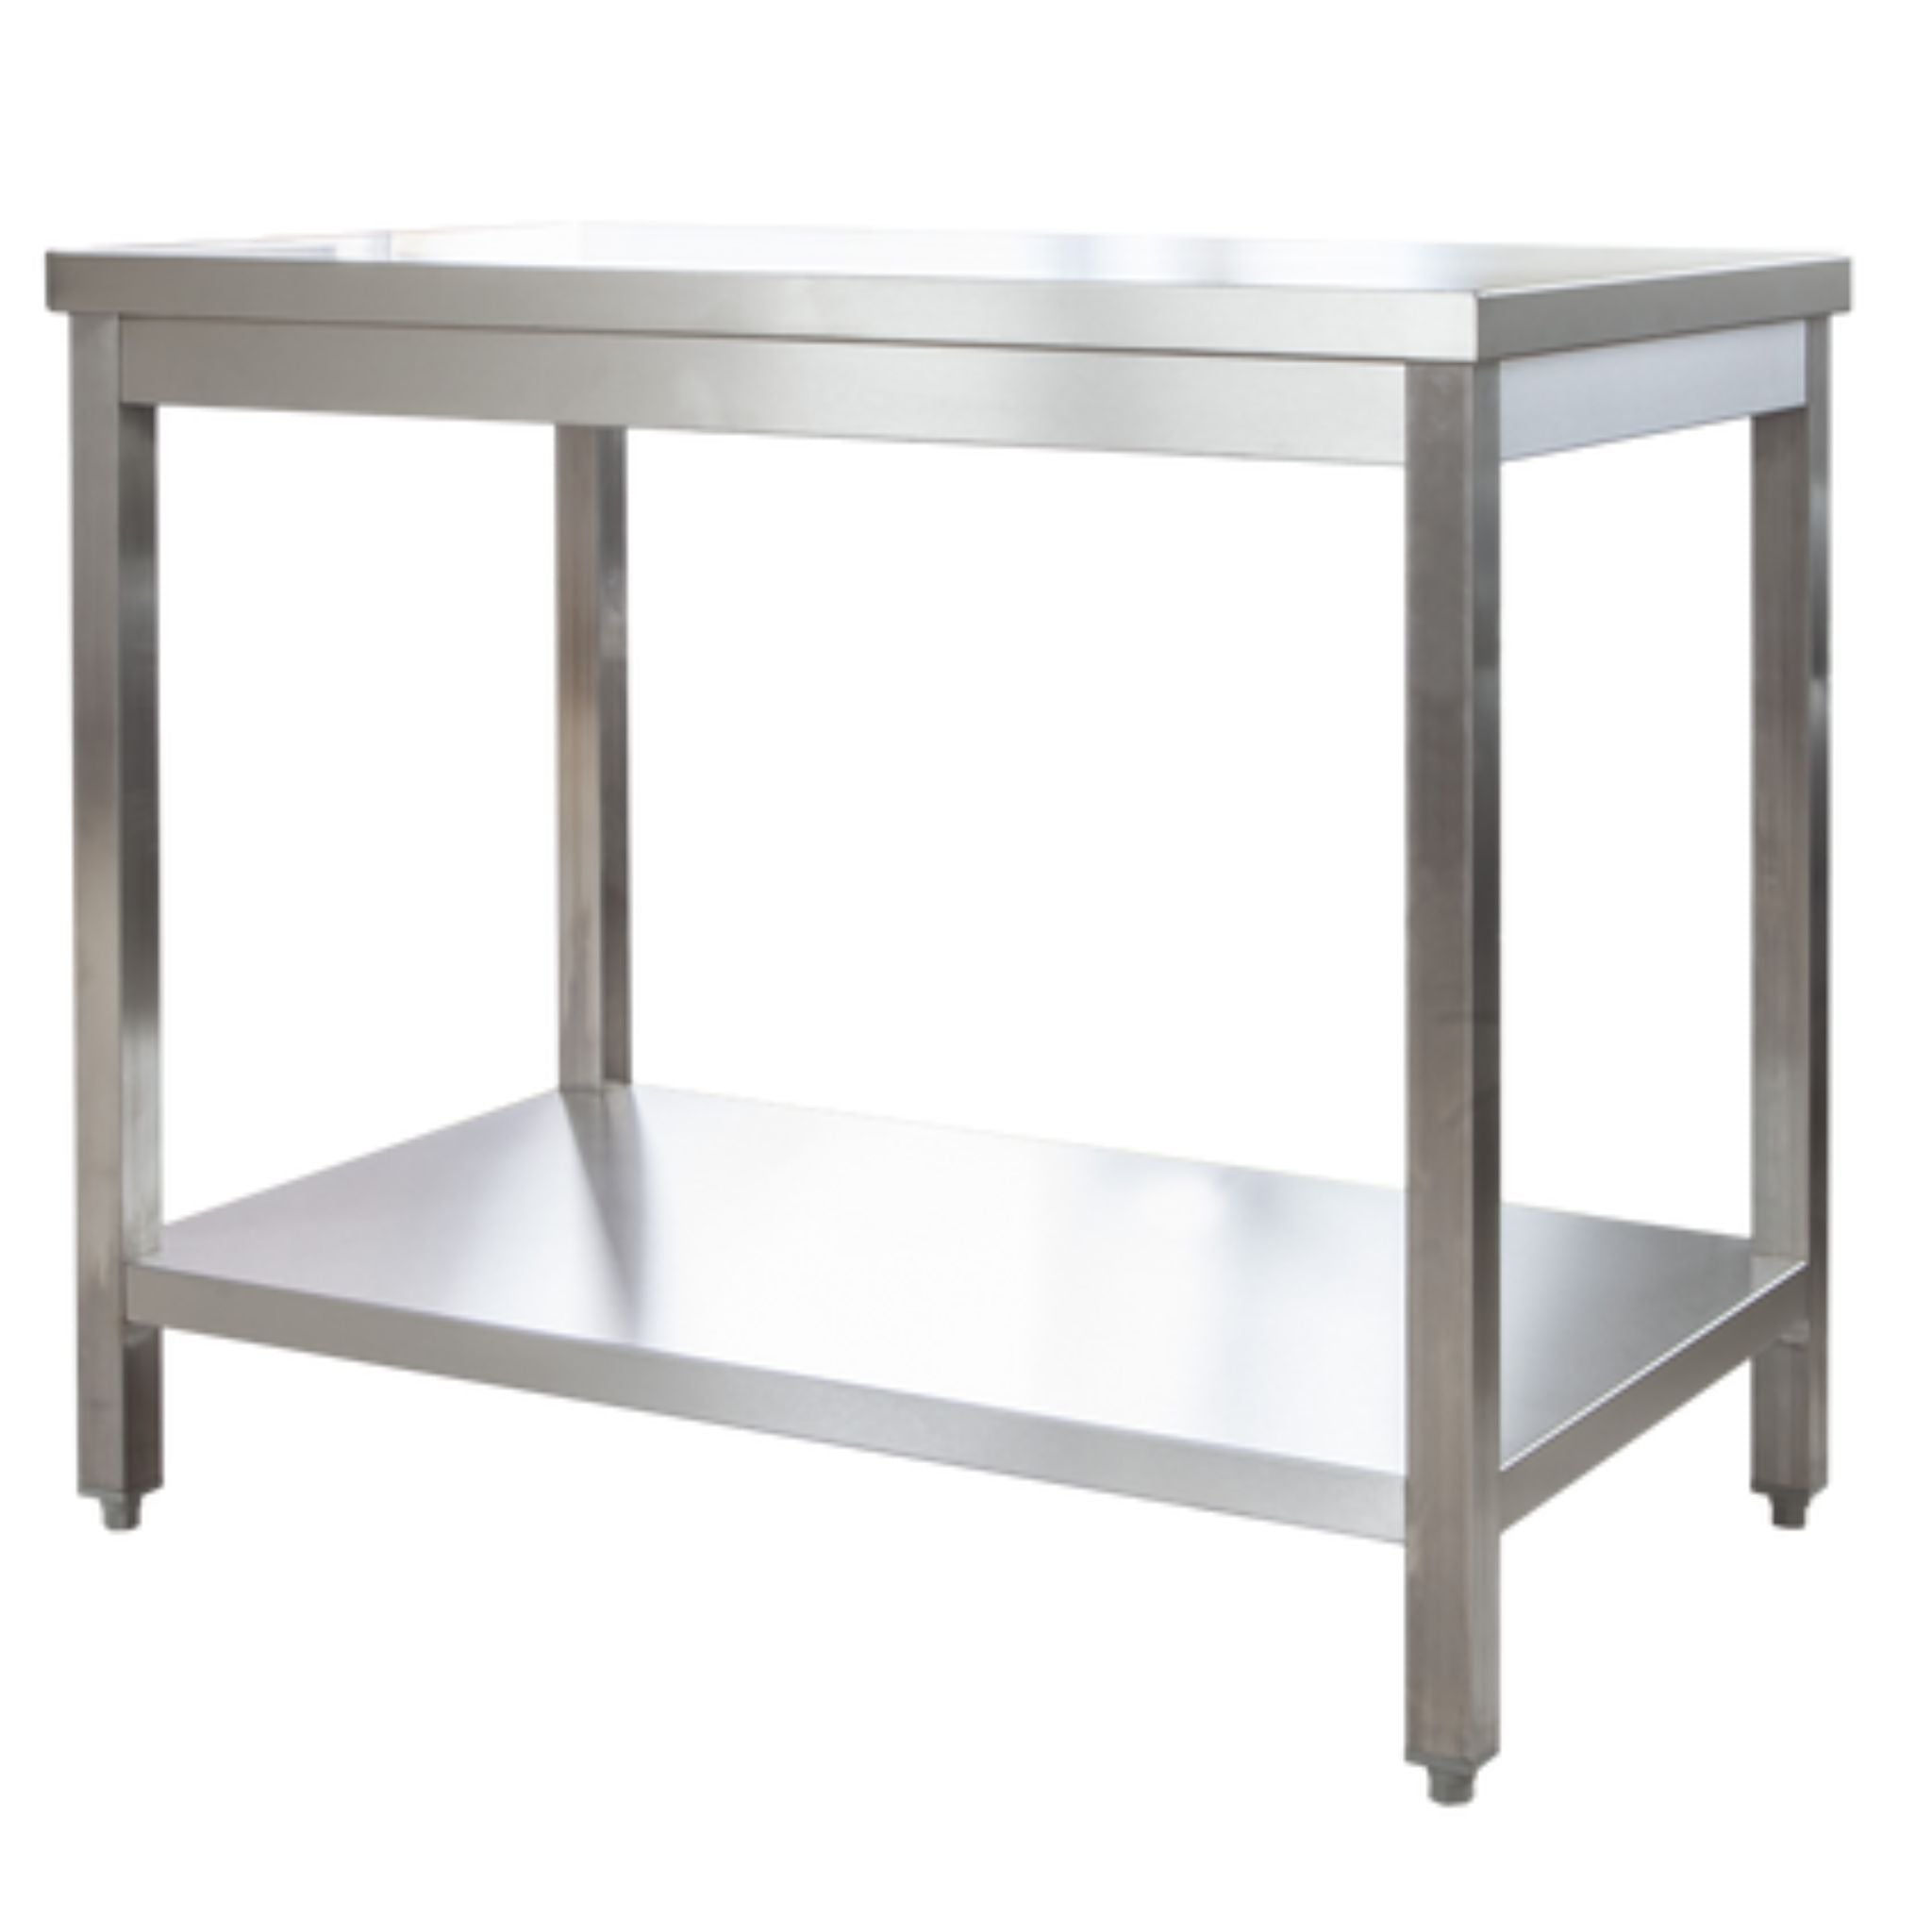 Professional stainless steel worktable with base - 0